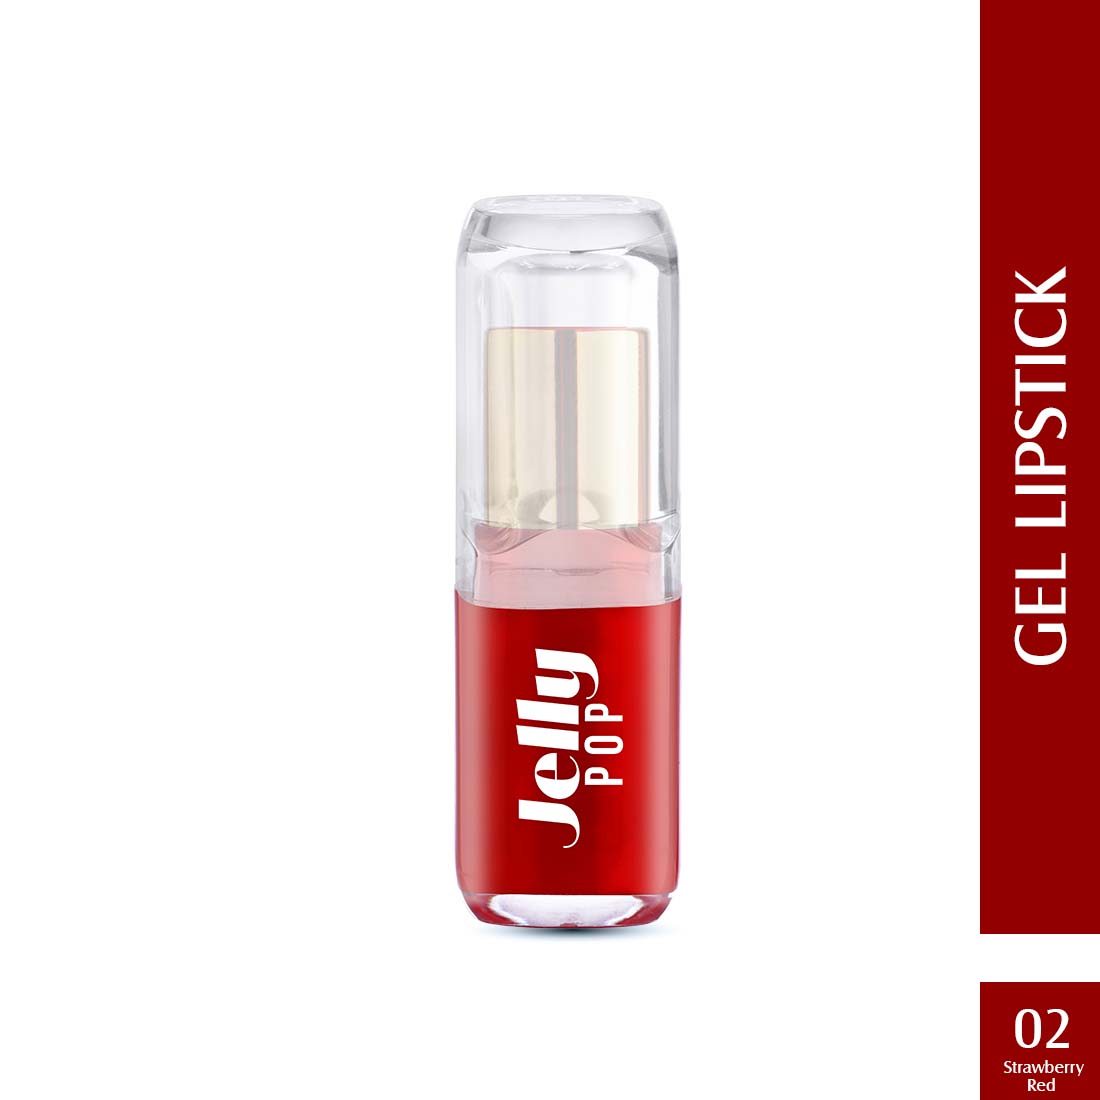 Glam21 Jelly Pop Color Change Fruity Gel Lipstick Soft Lips | Waterproof Glossy Finish, 3.5g (Strawberry Red)